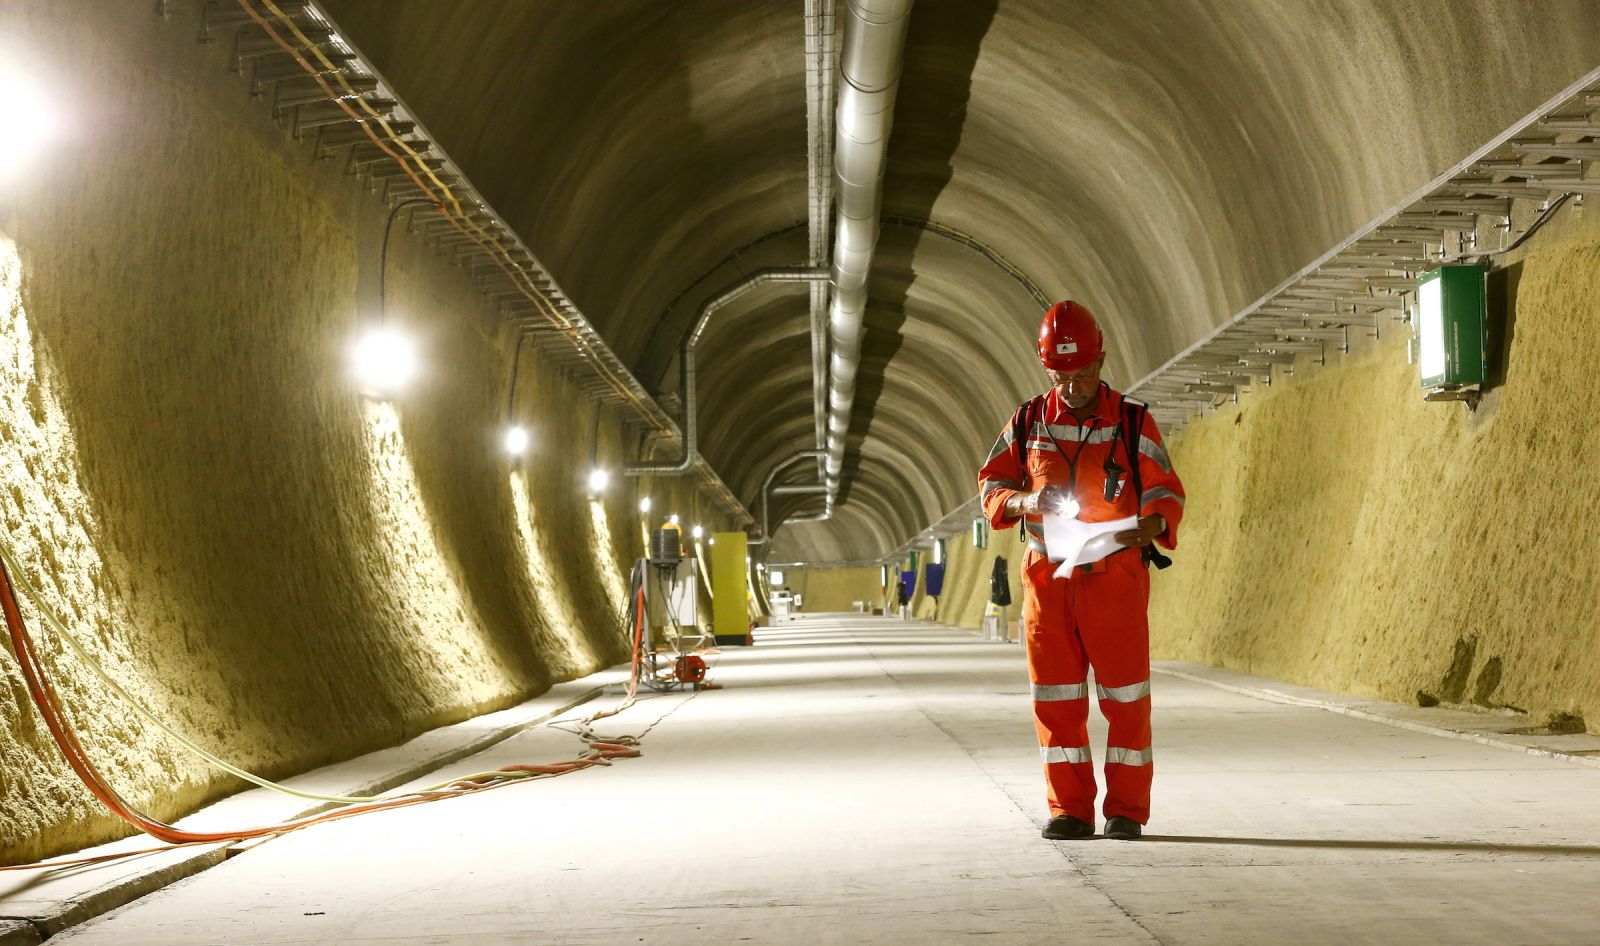 Check Out These Stunning Images Of The Worldâ€™s Longest Rail Tunnel In Switzerland